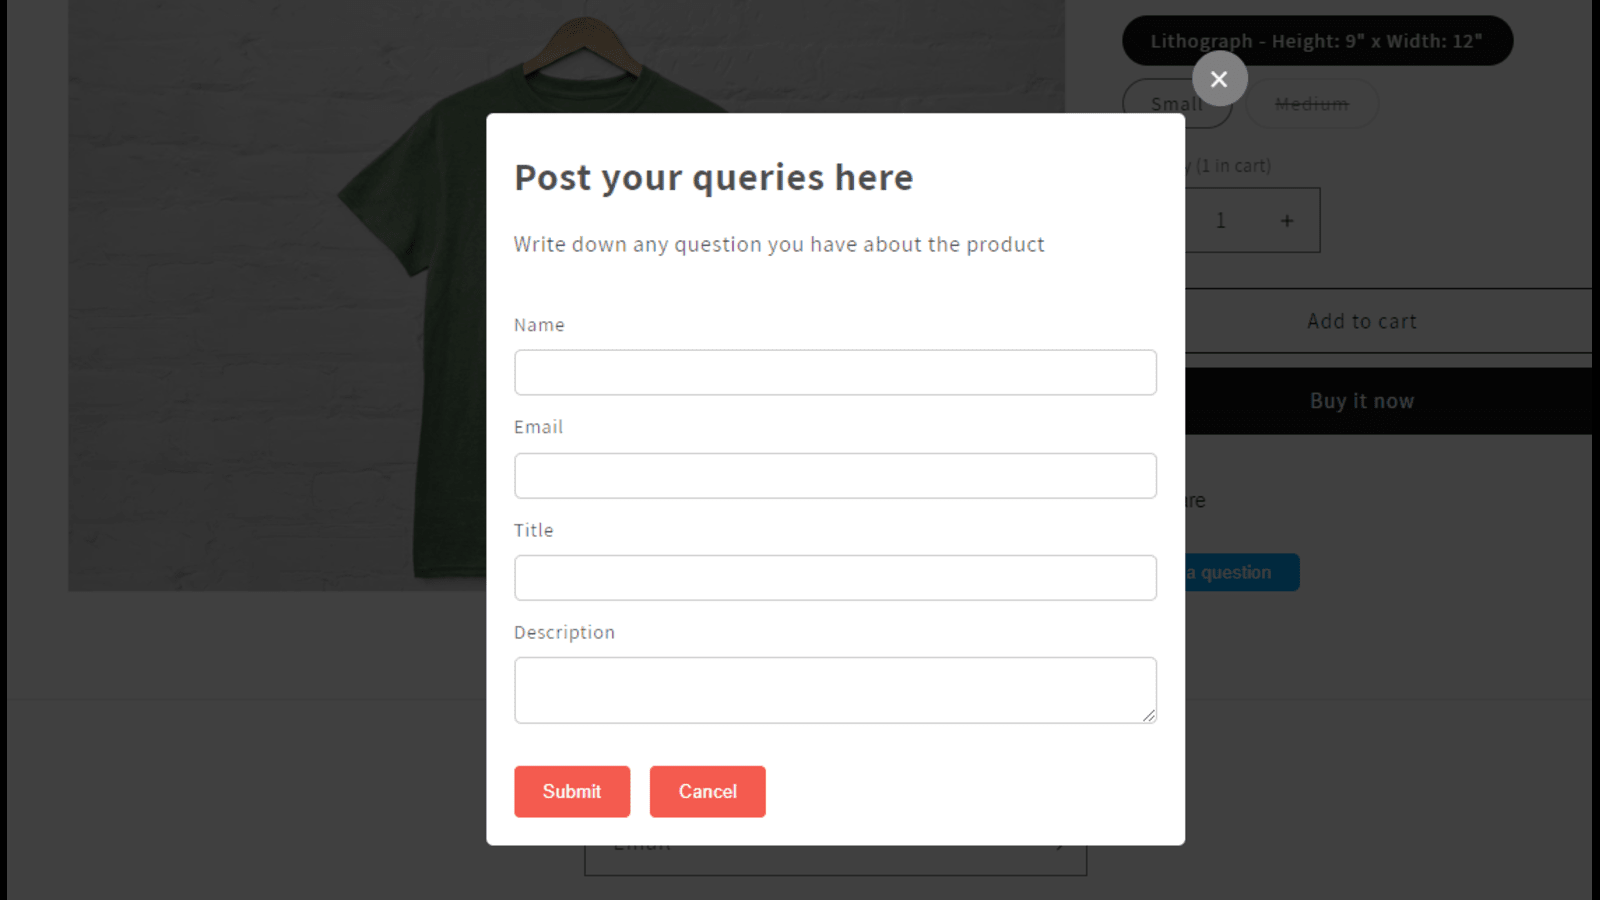 Dynamic query form generated on click of "ask question" button.